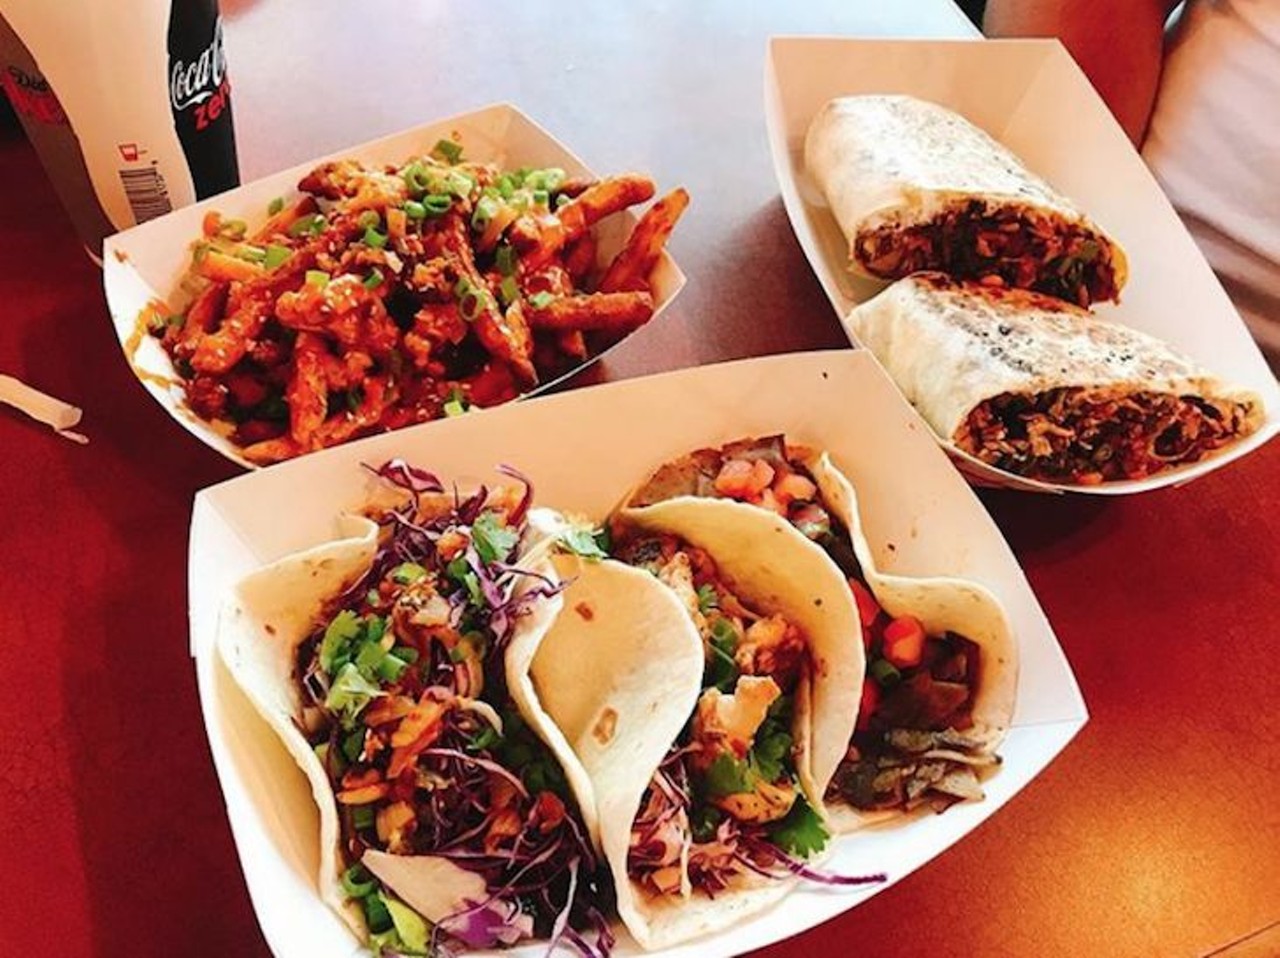 Tako Cheena
932 N. Mills Ave. | 407-757-0626
Lines out the door are normal here but so worth the wait for these unique, Asian/Latin food creations. Try the Korean beef burrito if you don't feel like eating again for a day or two.
Photo via mi2nami/Instagram